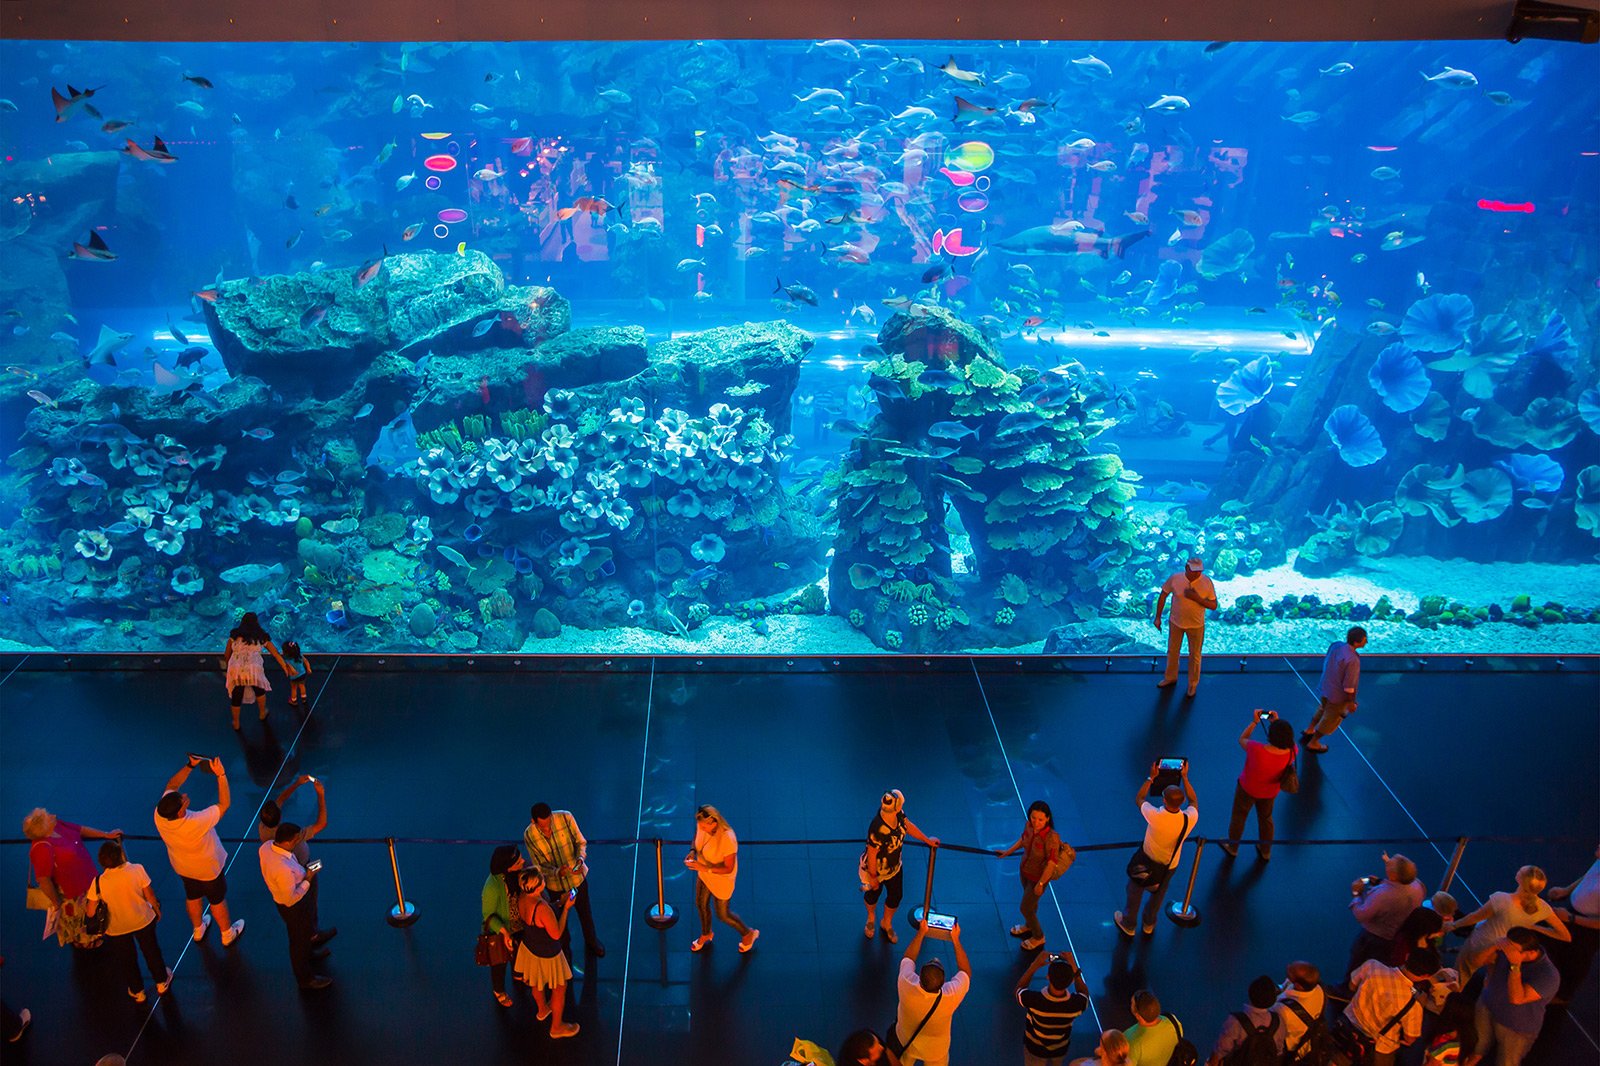 How to see the aquarium with the world’s largest glass area in Dubai